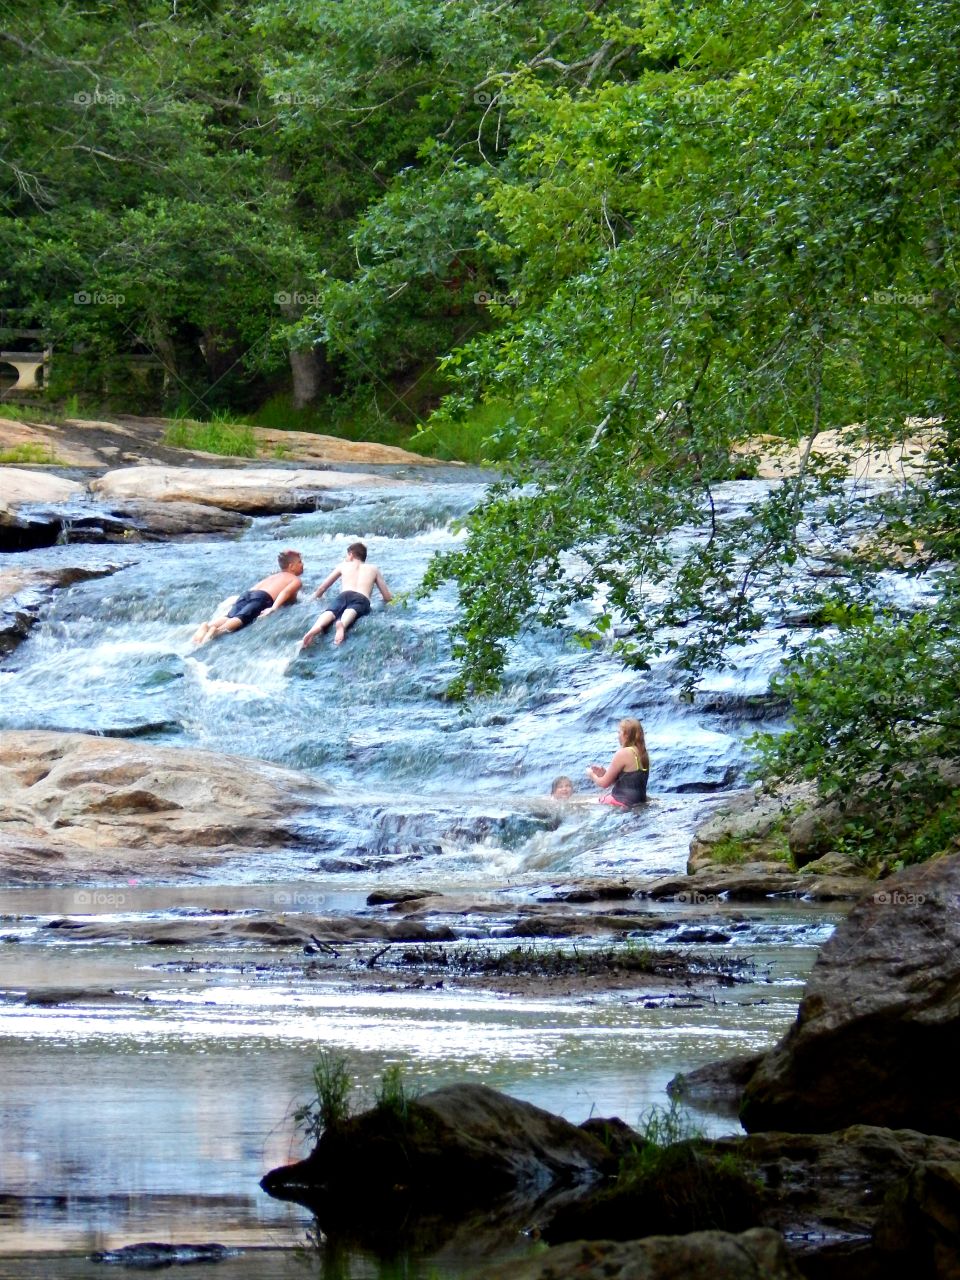 People cooling off at the creek rock slide in Victoria Bryant state park, Georgia